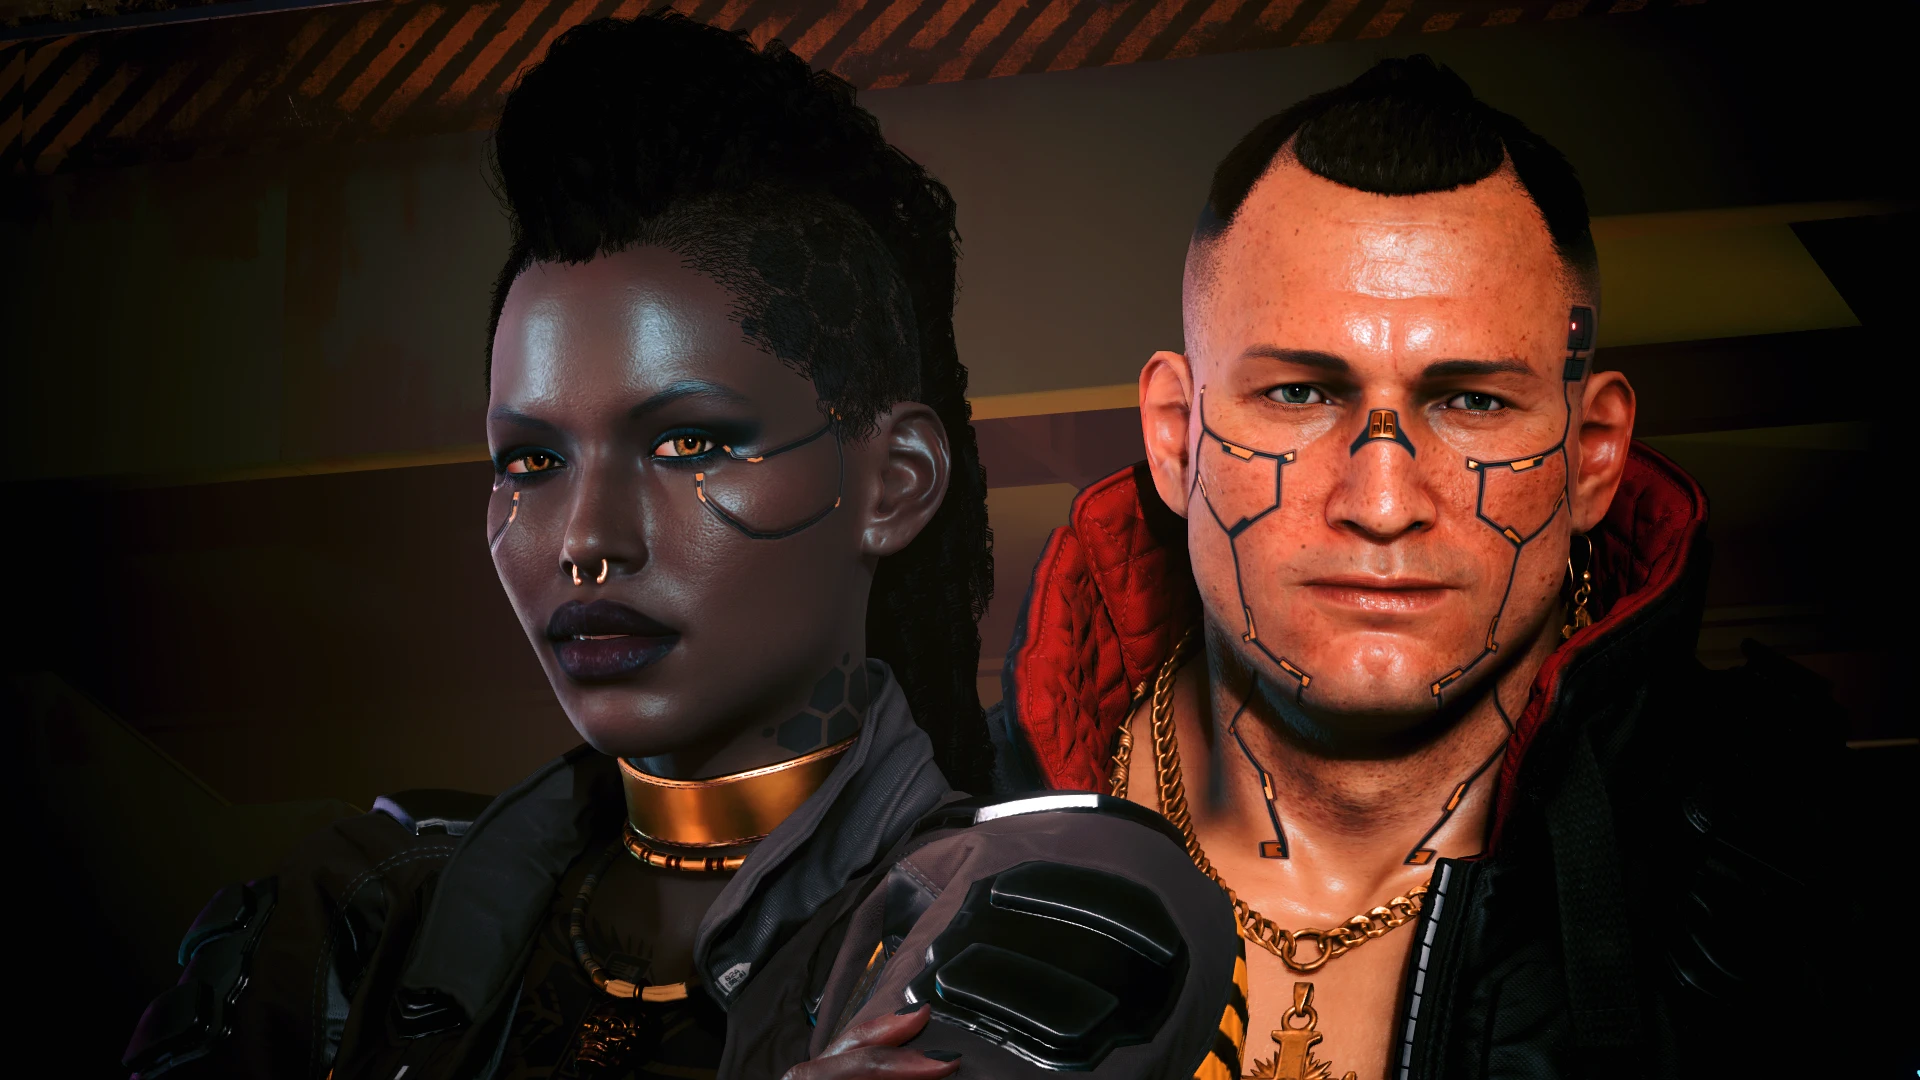 What A Pair at Cyberpunk 2077 Nexus - Mods and community